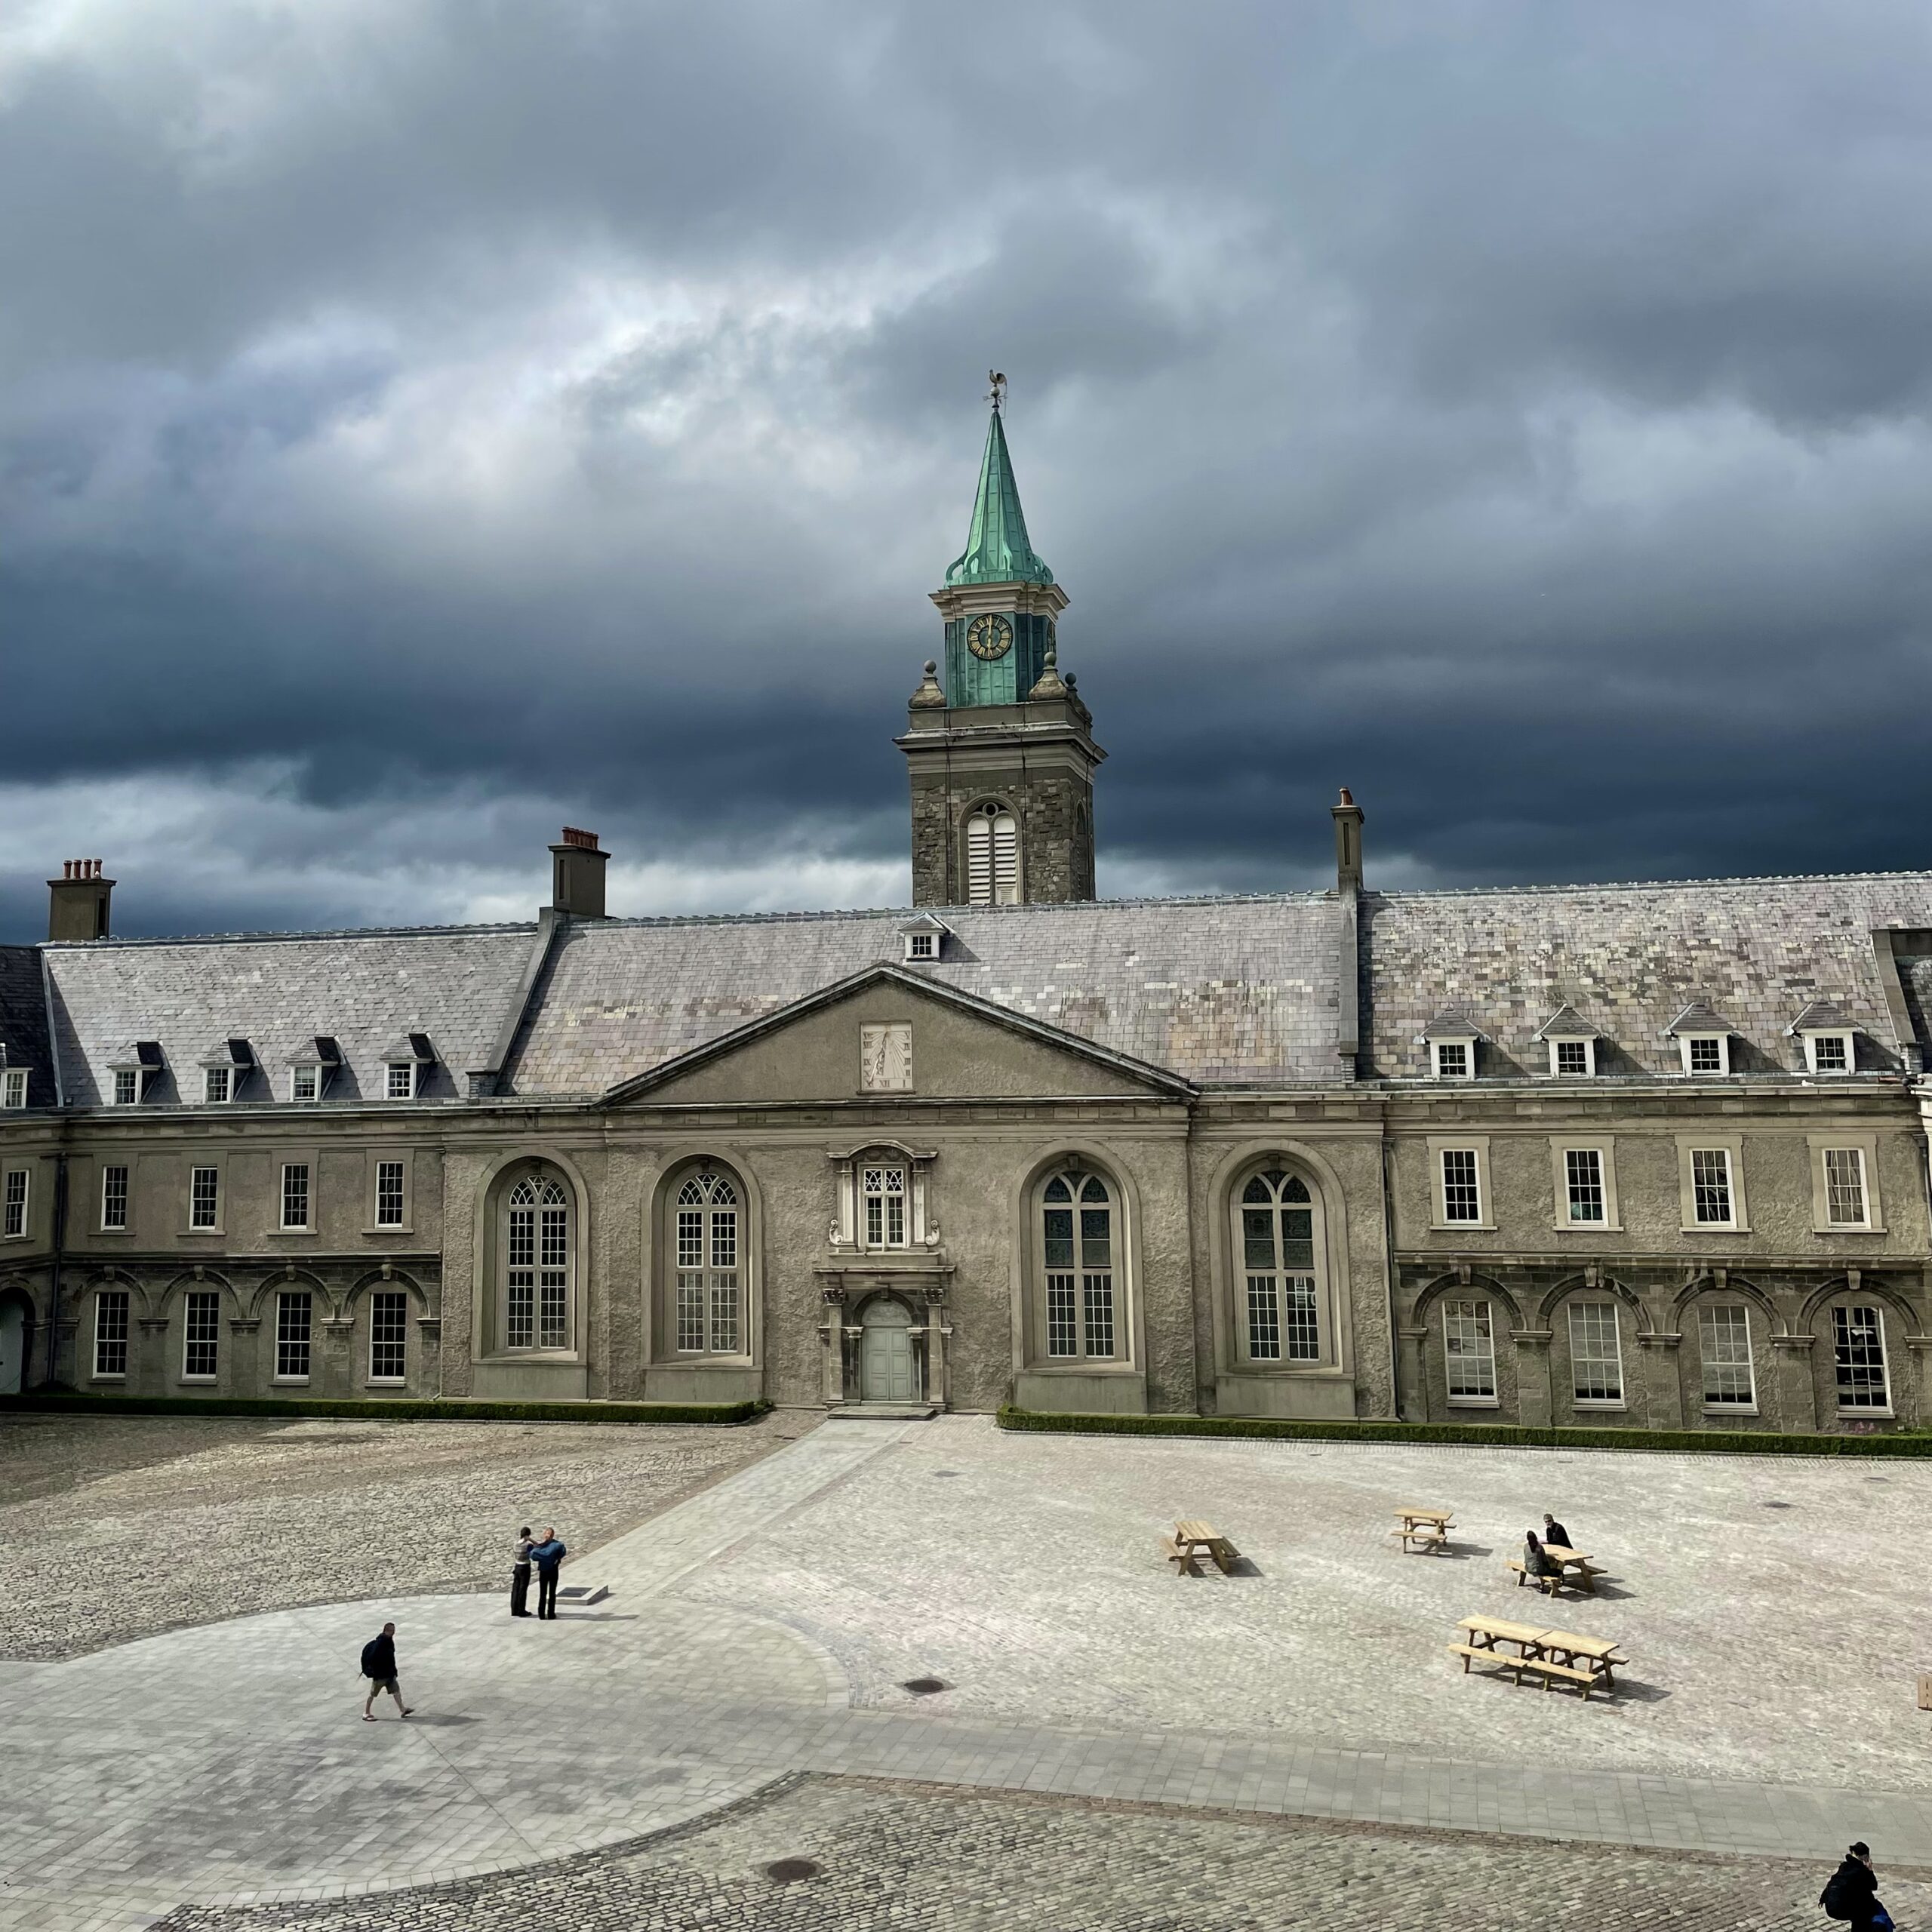 A grey historic building with large arch windows and central grey door, a clock tower with green spire in the centre of the roof, overlooking a cobbled courtyard with a few picnic-style seat tables and some people walking and sitting. The sky is brooding, cloudy and grey.